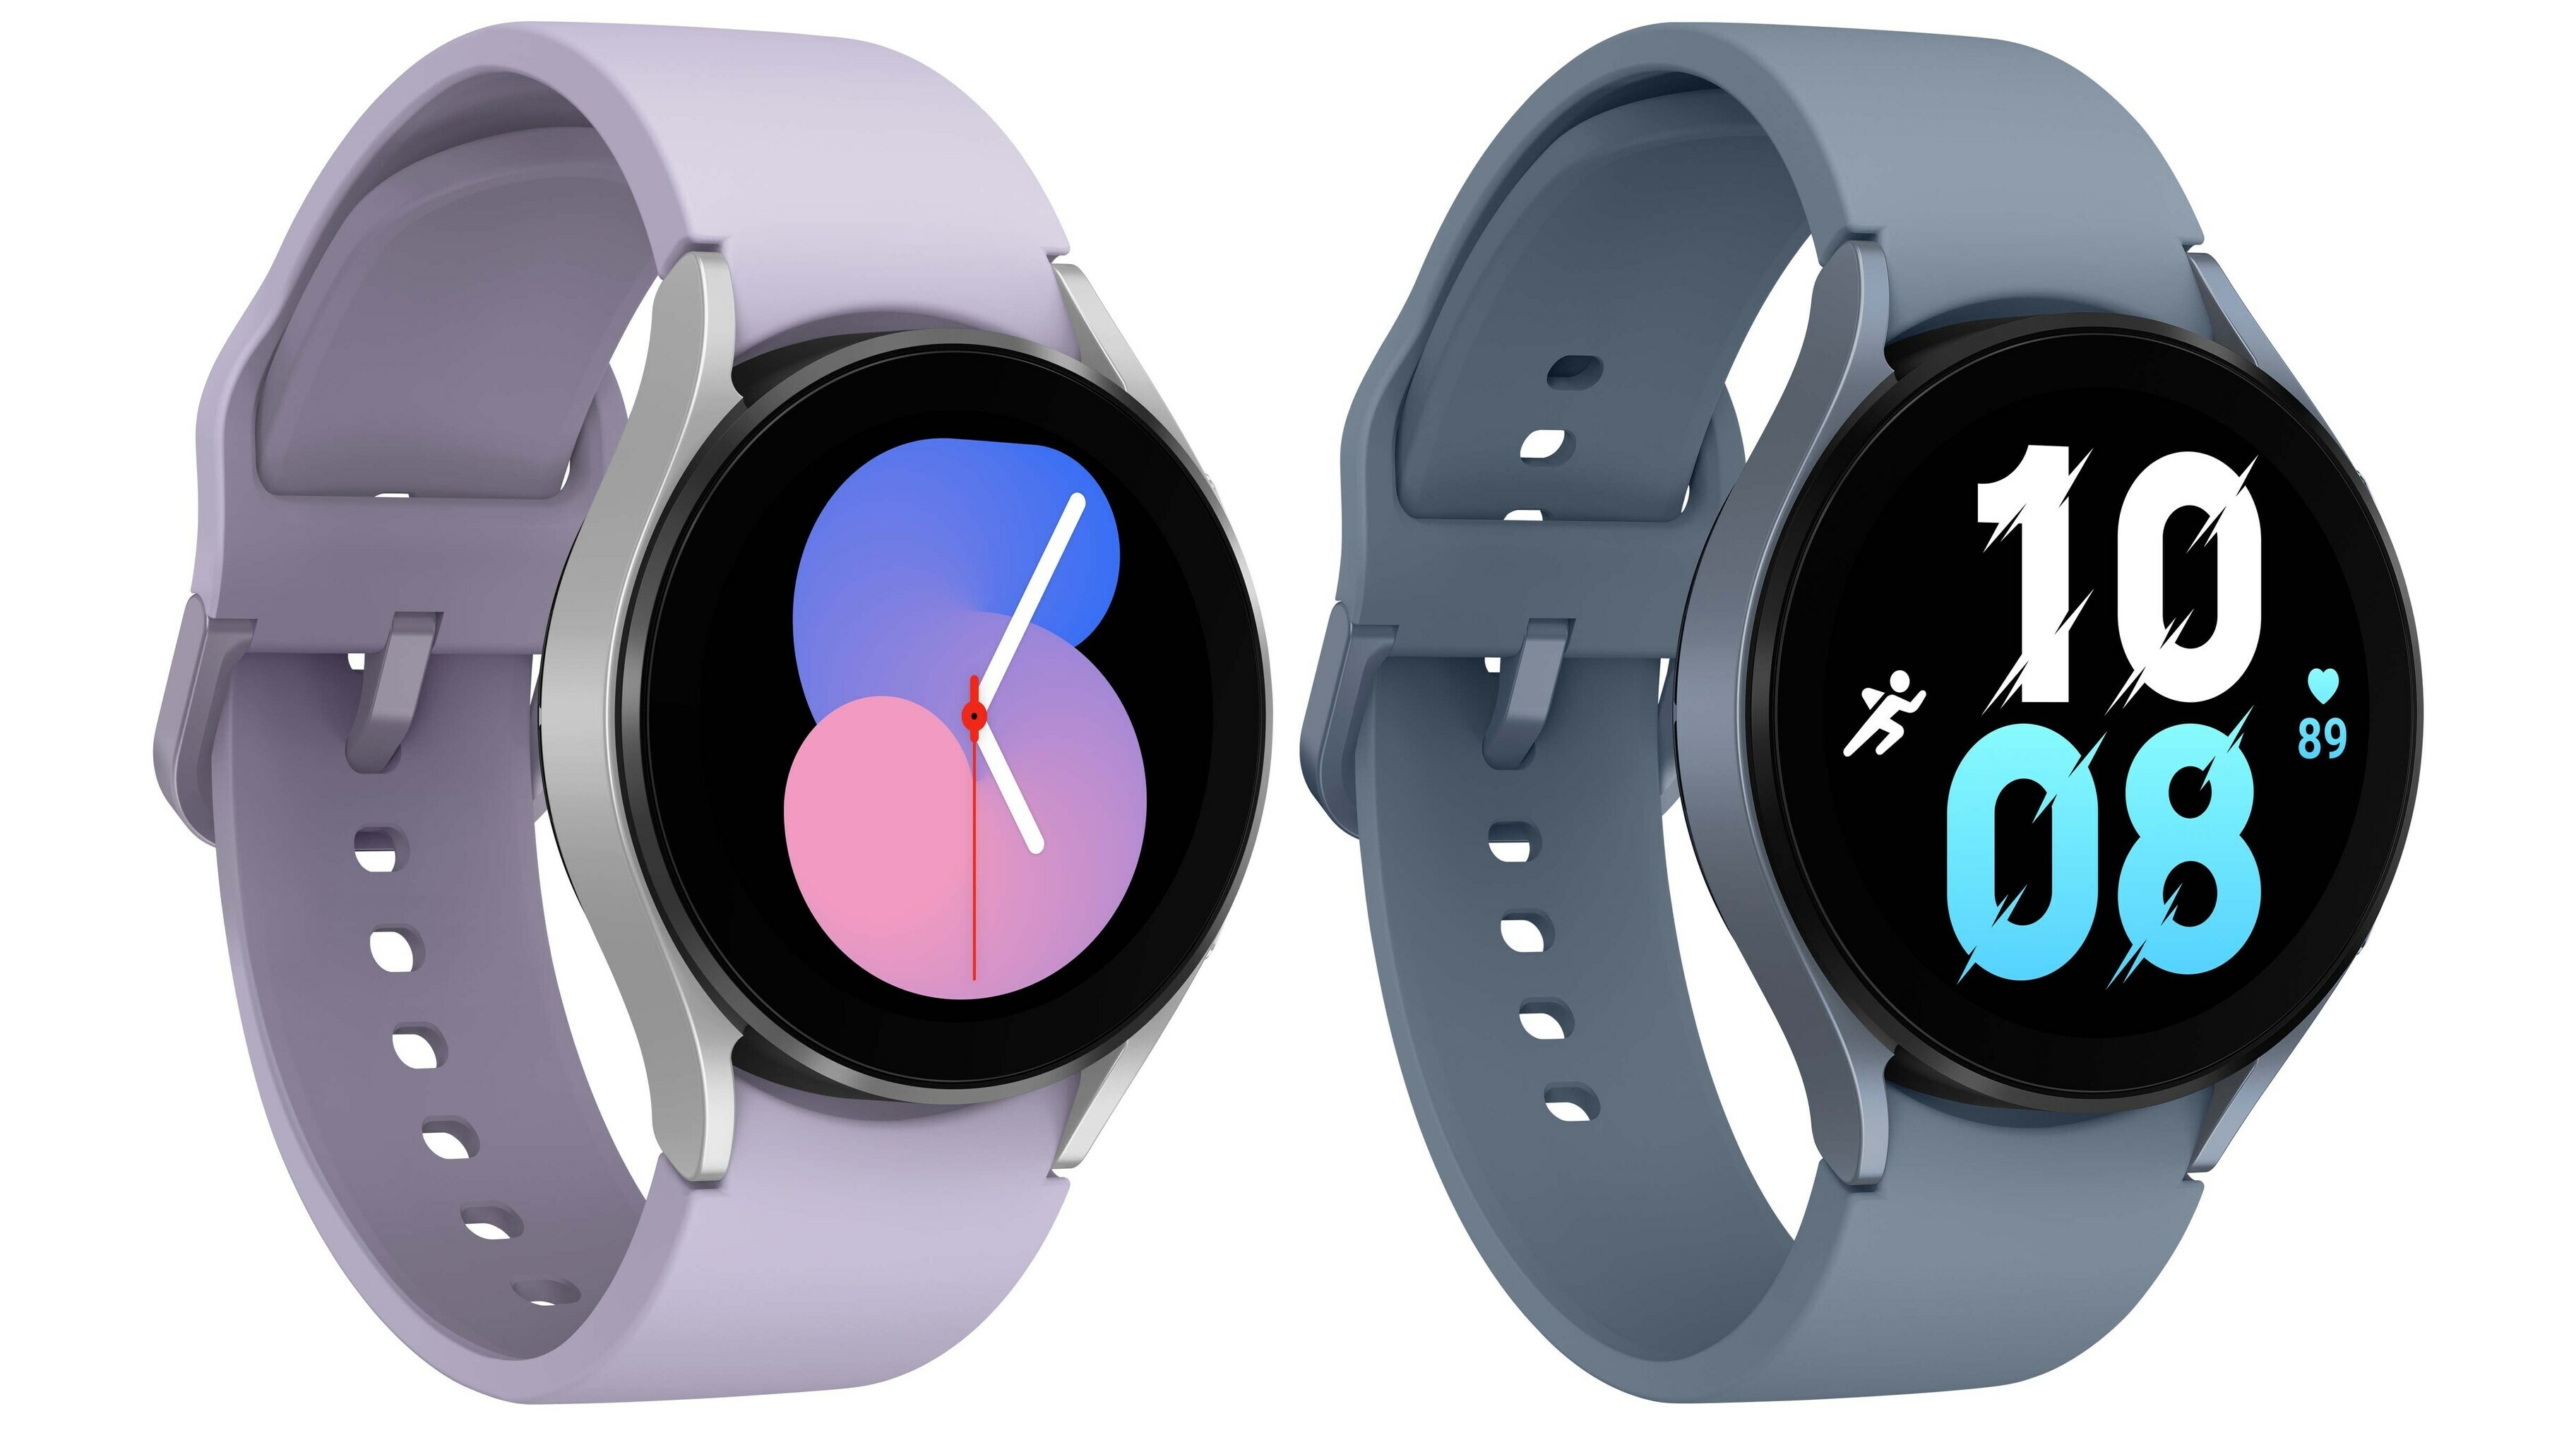 Leaked image of Galaxy Watch 5, 40mm on the left and 44mm on the right